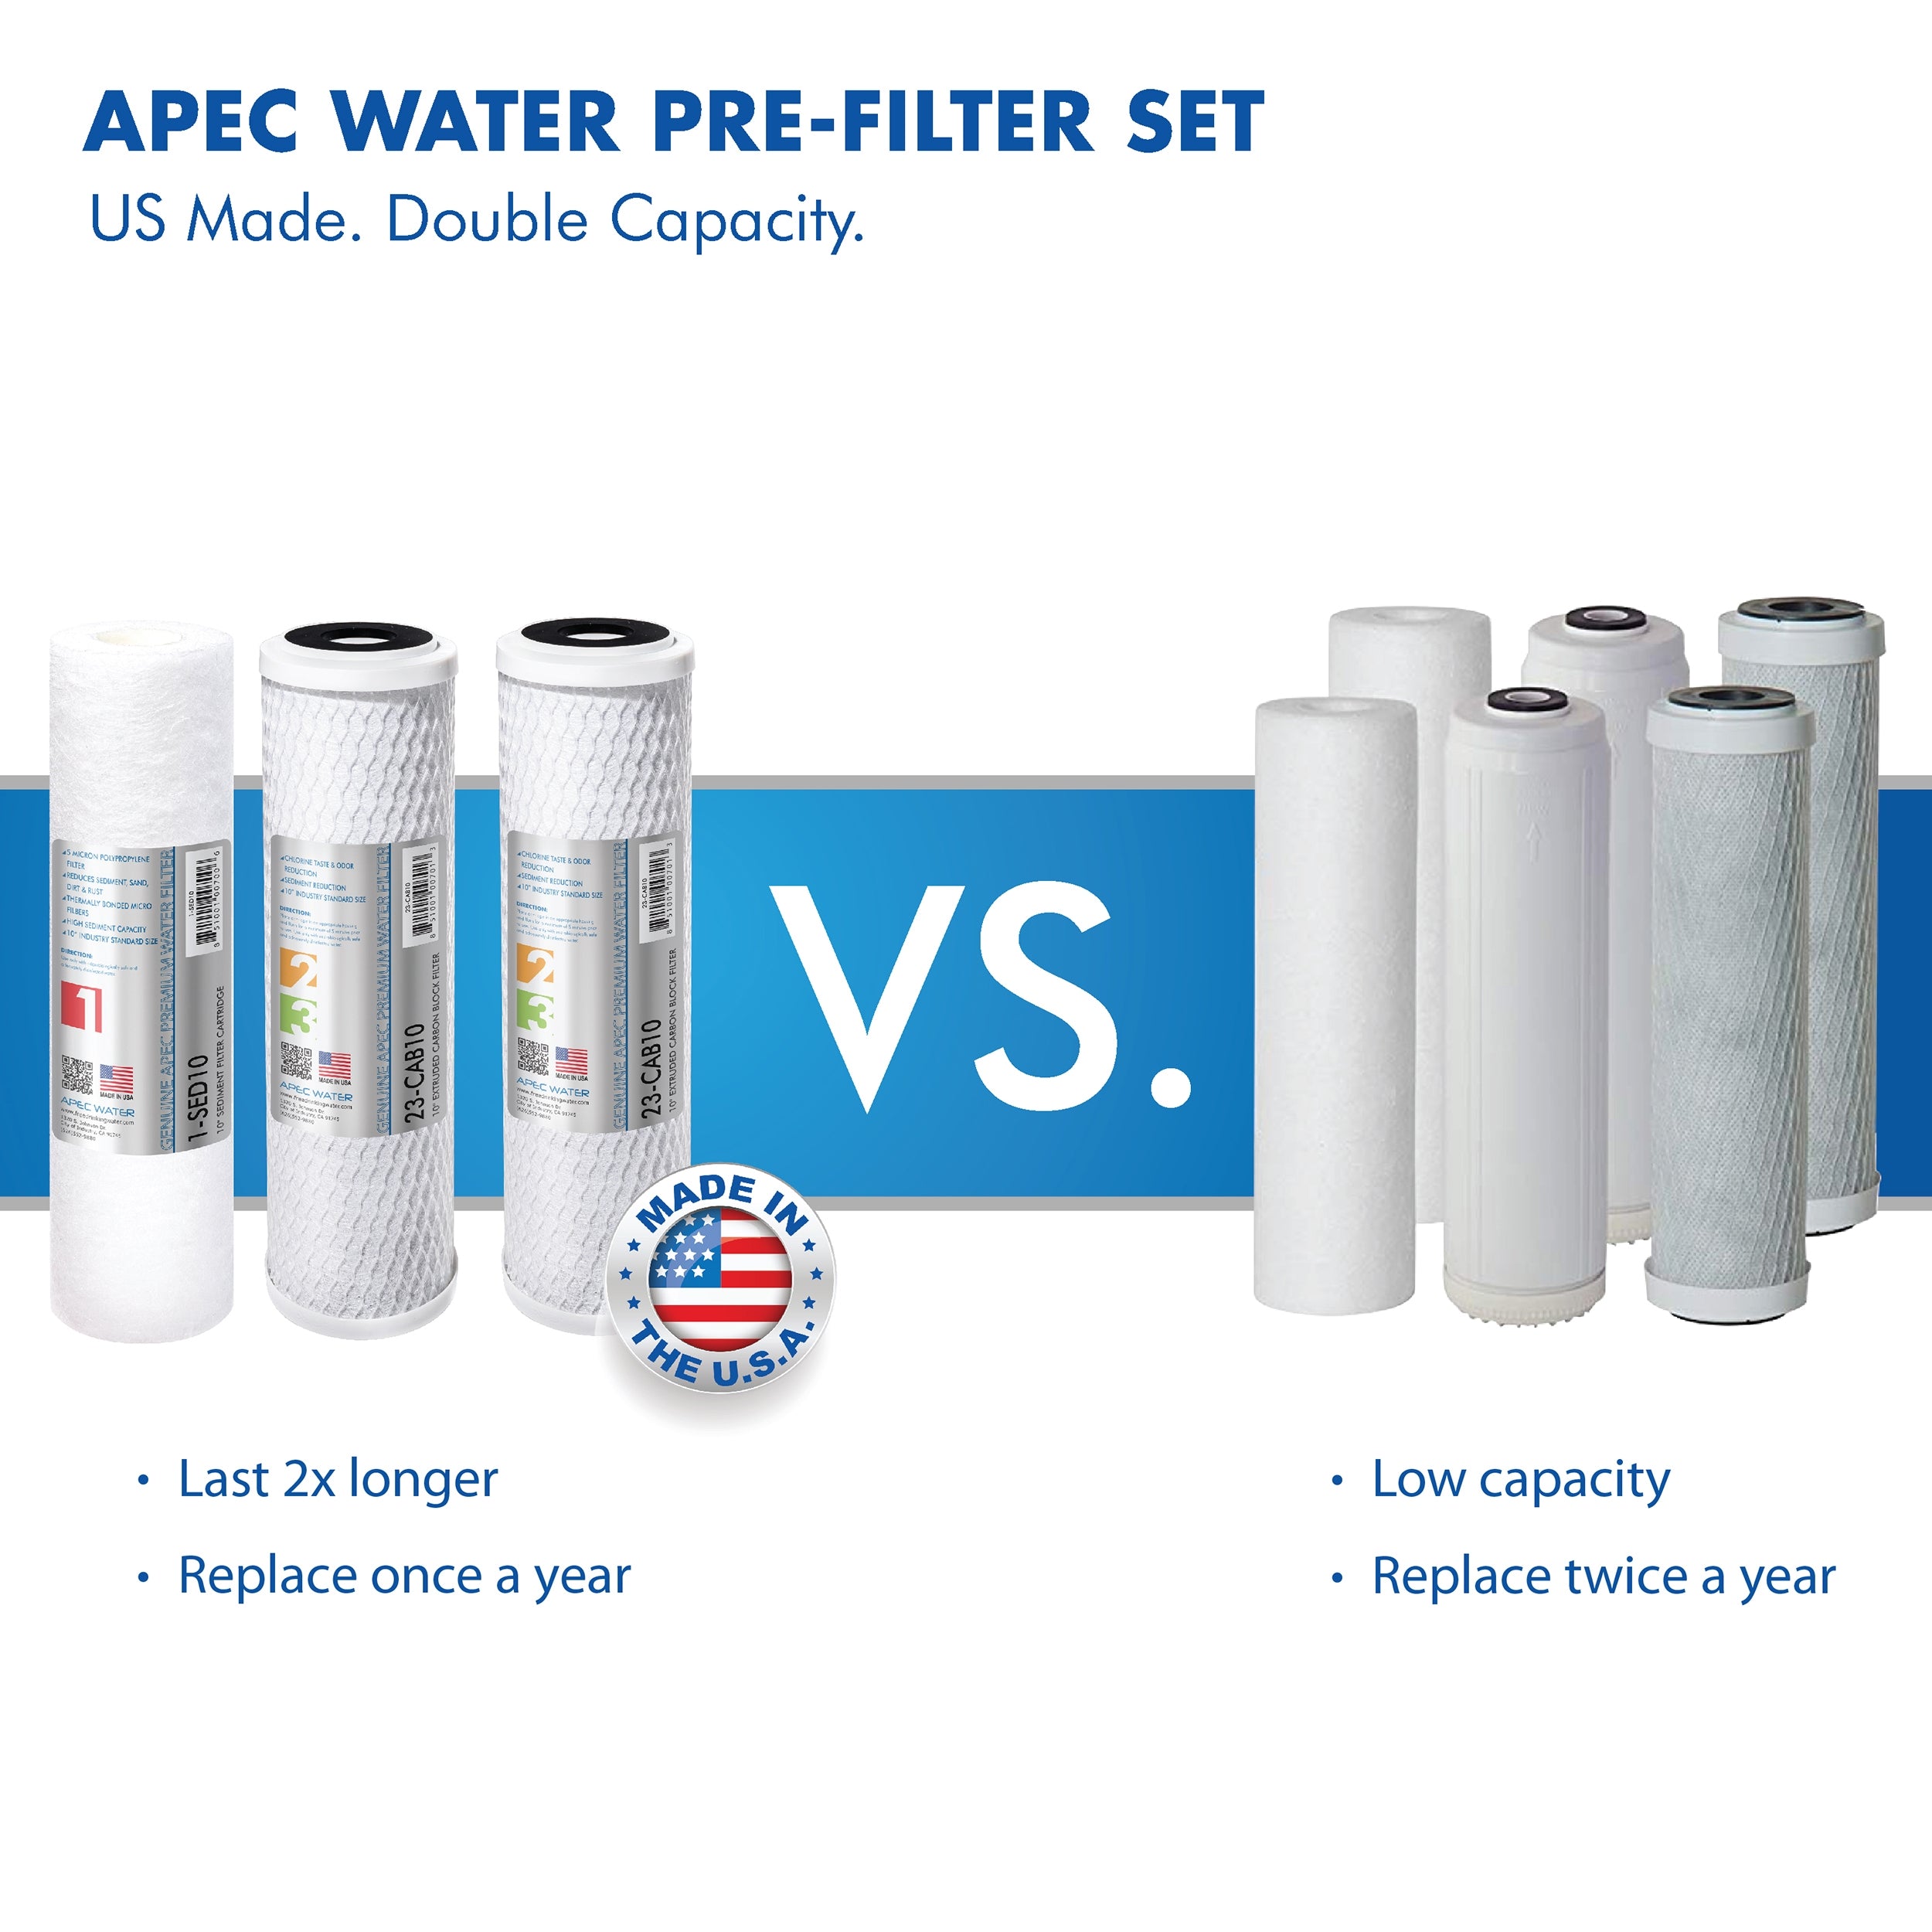 WFS-1000 - Super Capacity Premium Quality 3 Stage Water Filtration System